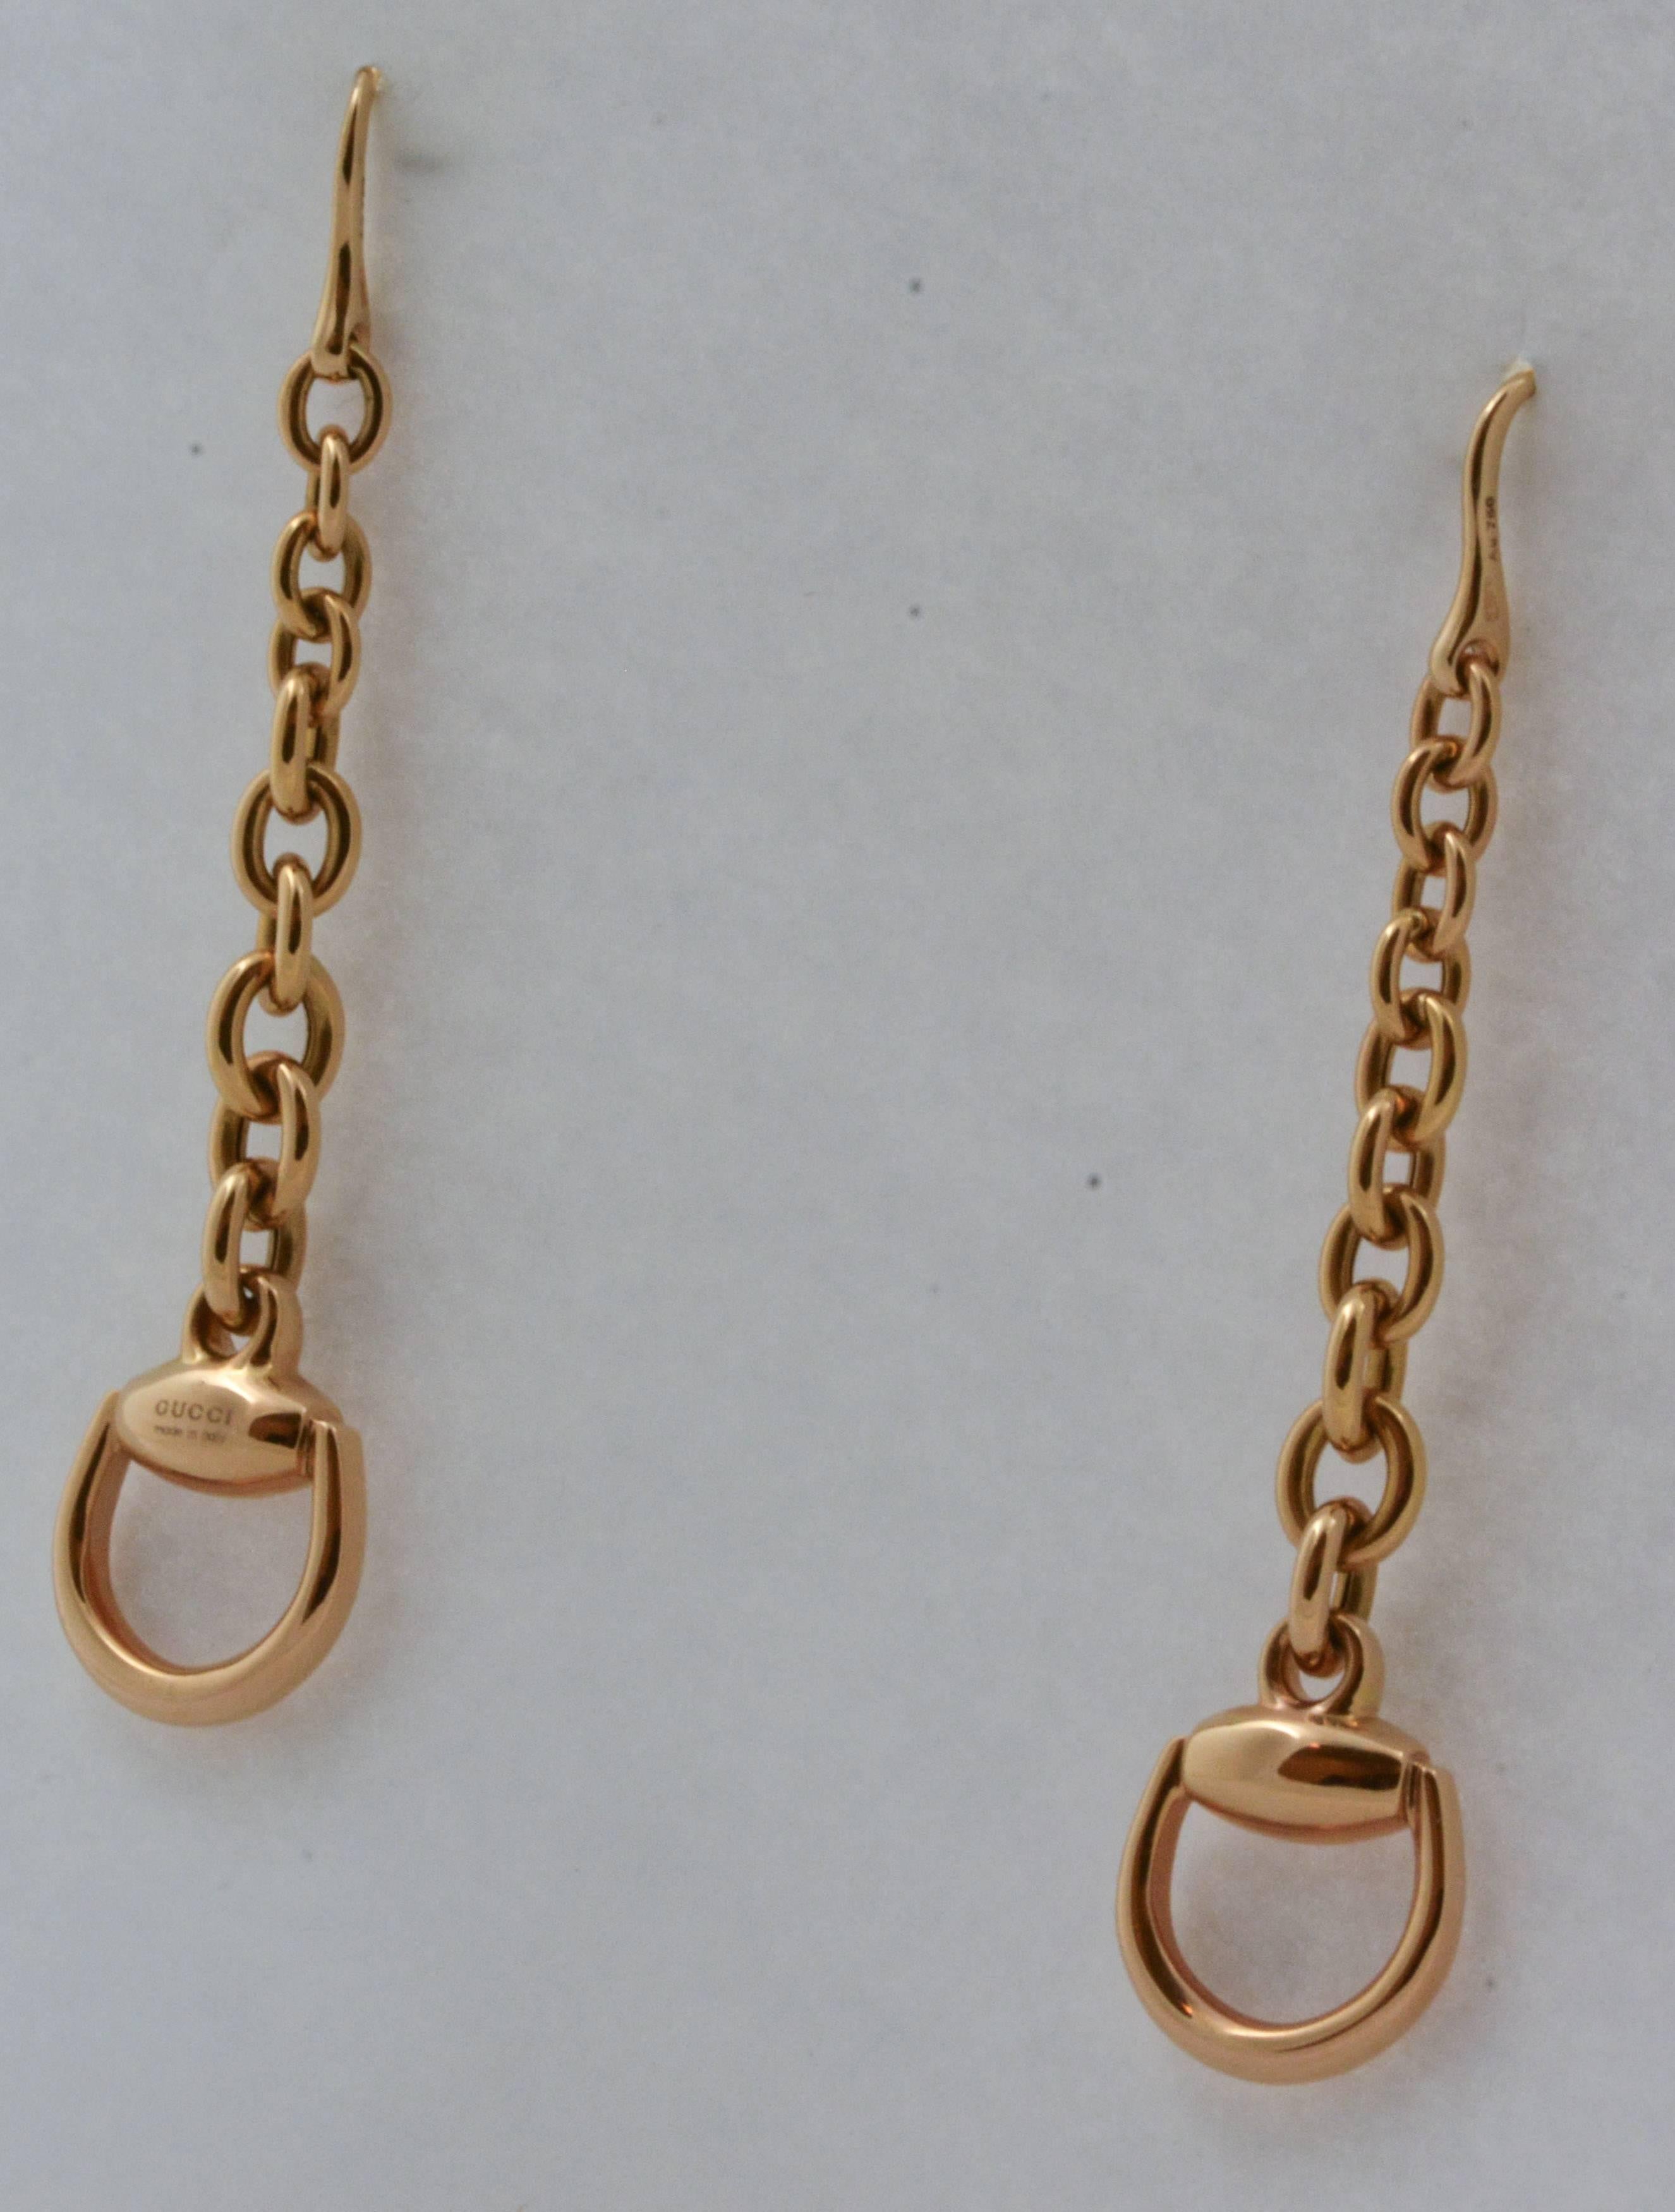 These elegant Gucci 18kt pink gold Horsebit drop earrings form a beautiful chain and snaffle bit design. They hang 2.5in from the ear and are sure to complement any ensemble.